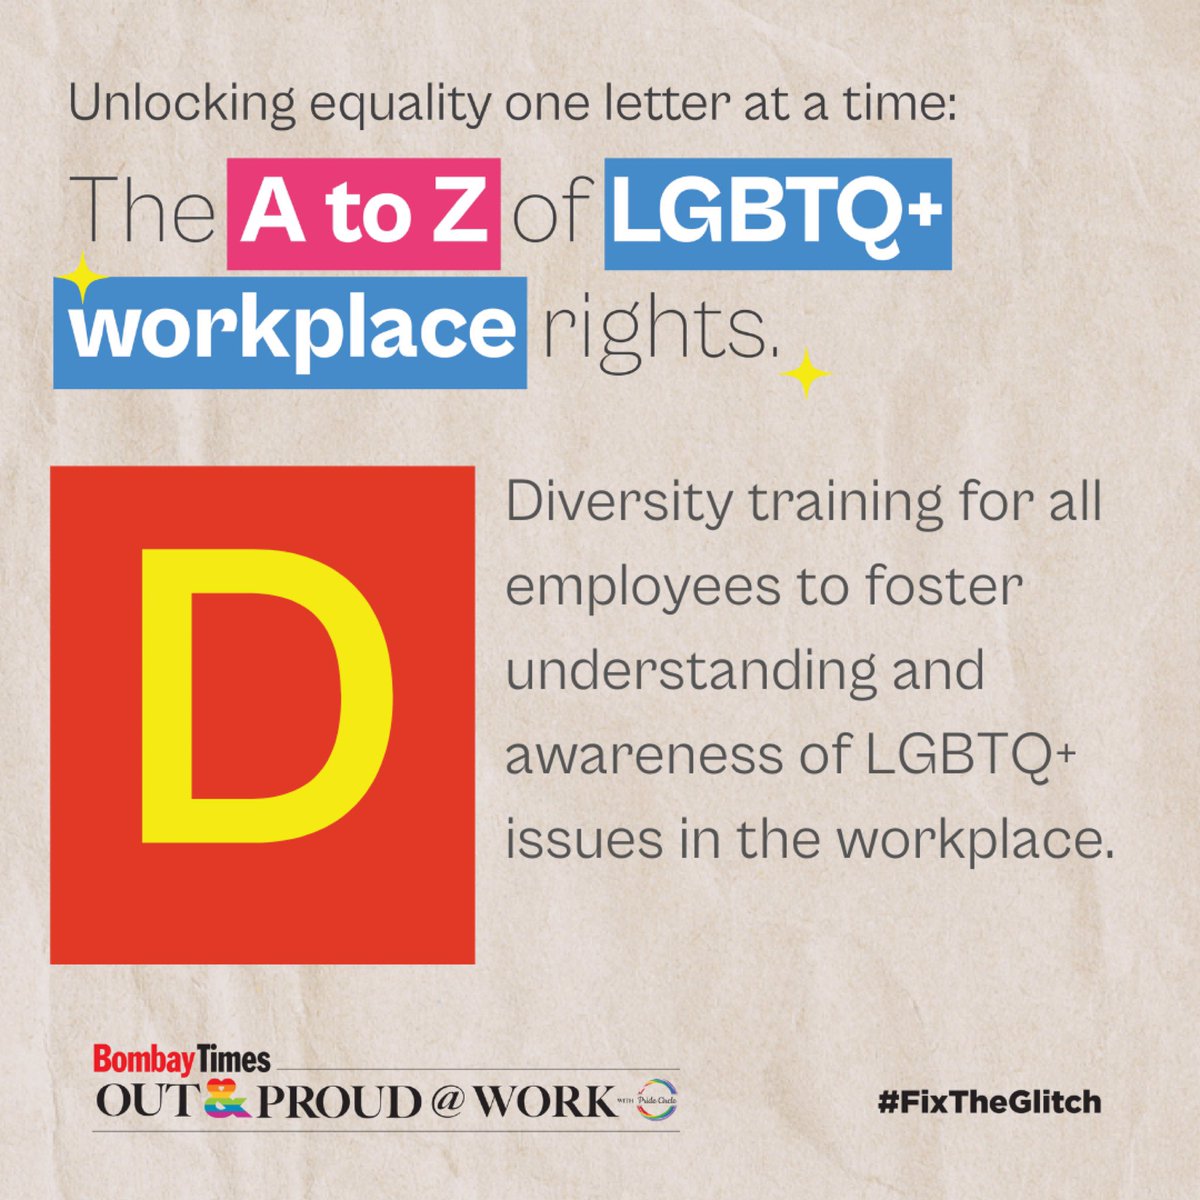 Don't just be an ally in theory, be an ally in action.   Check out ‘The A to Z of LGBTQIA+ Workplace Rights’ and let’s stride ahead in our quest for a more equal tomorrow for all.    Pledge your support to #FixTheGlitch -  timesoutandproud.com/#take-my-pledge #InclusivityAtWorkplaces